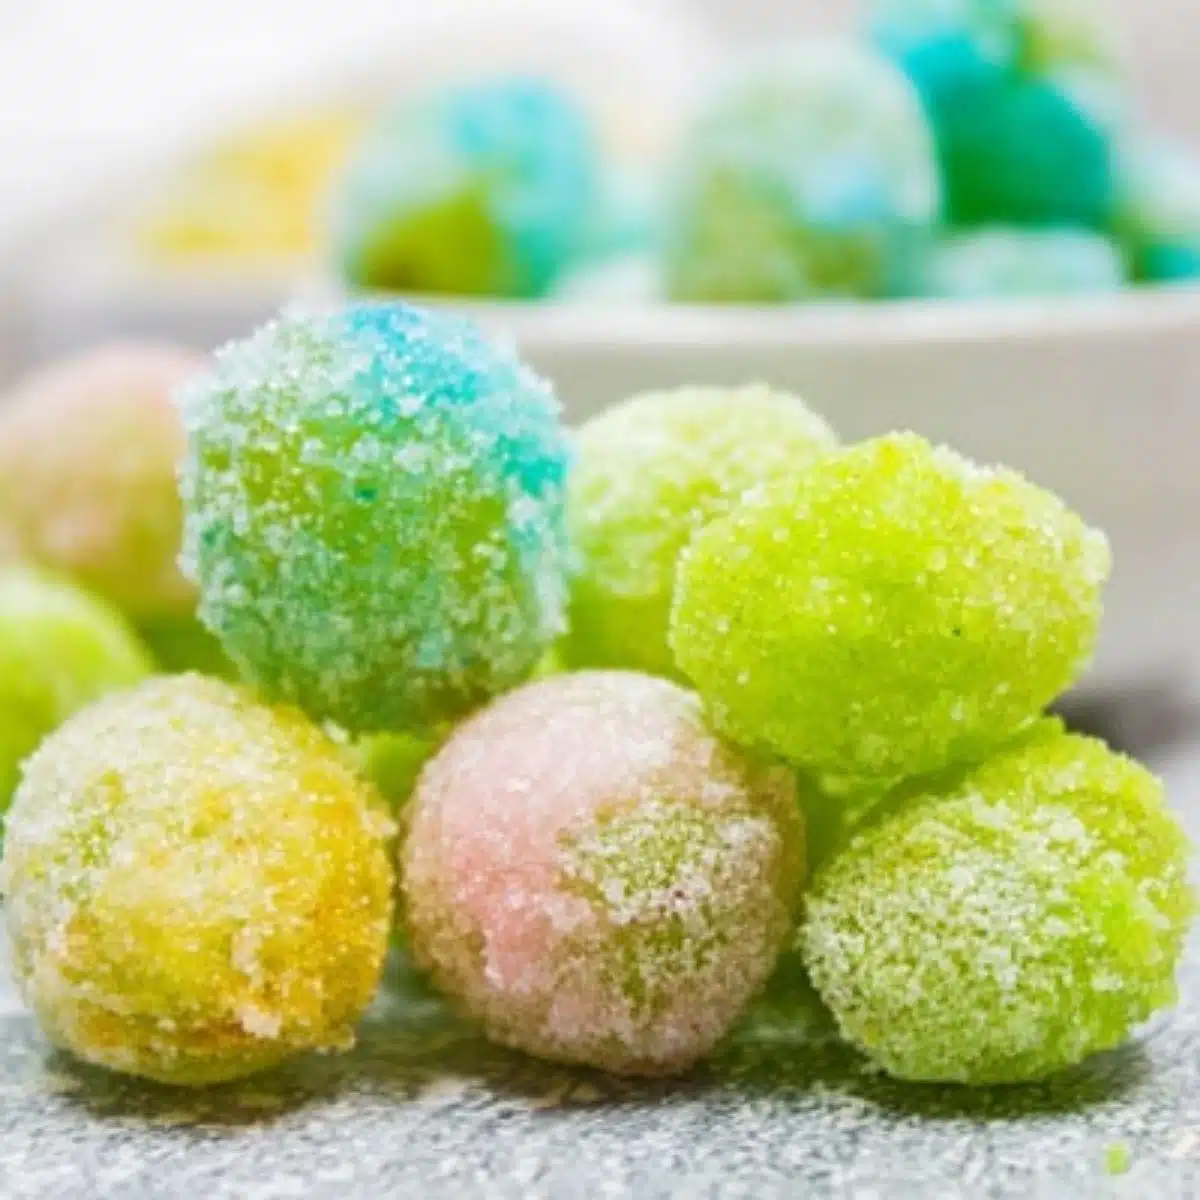 Square image of colorful candy grapes.